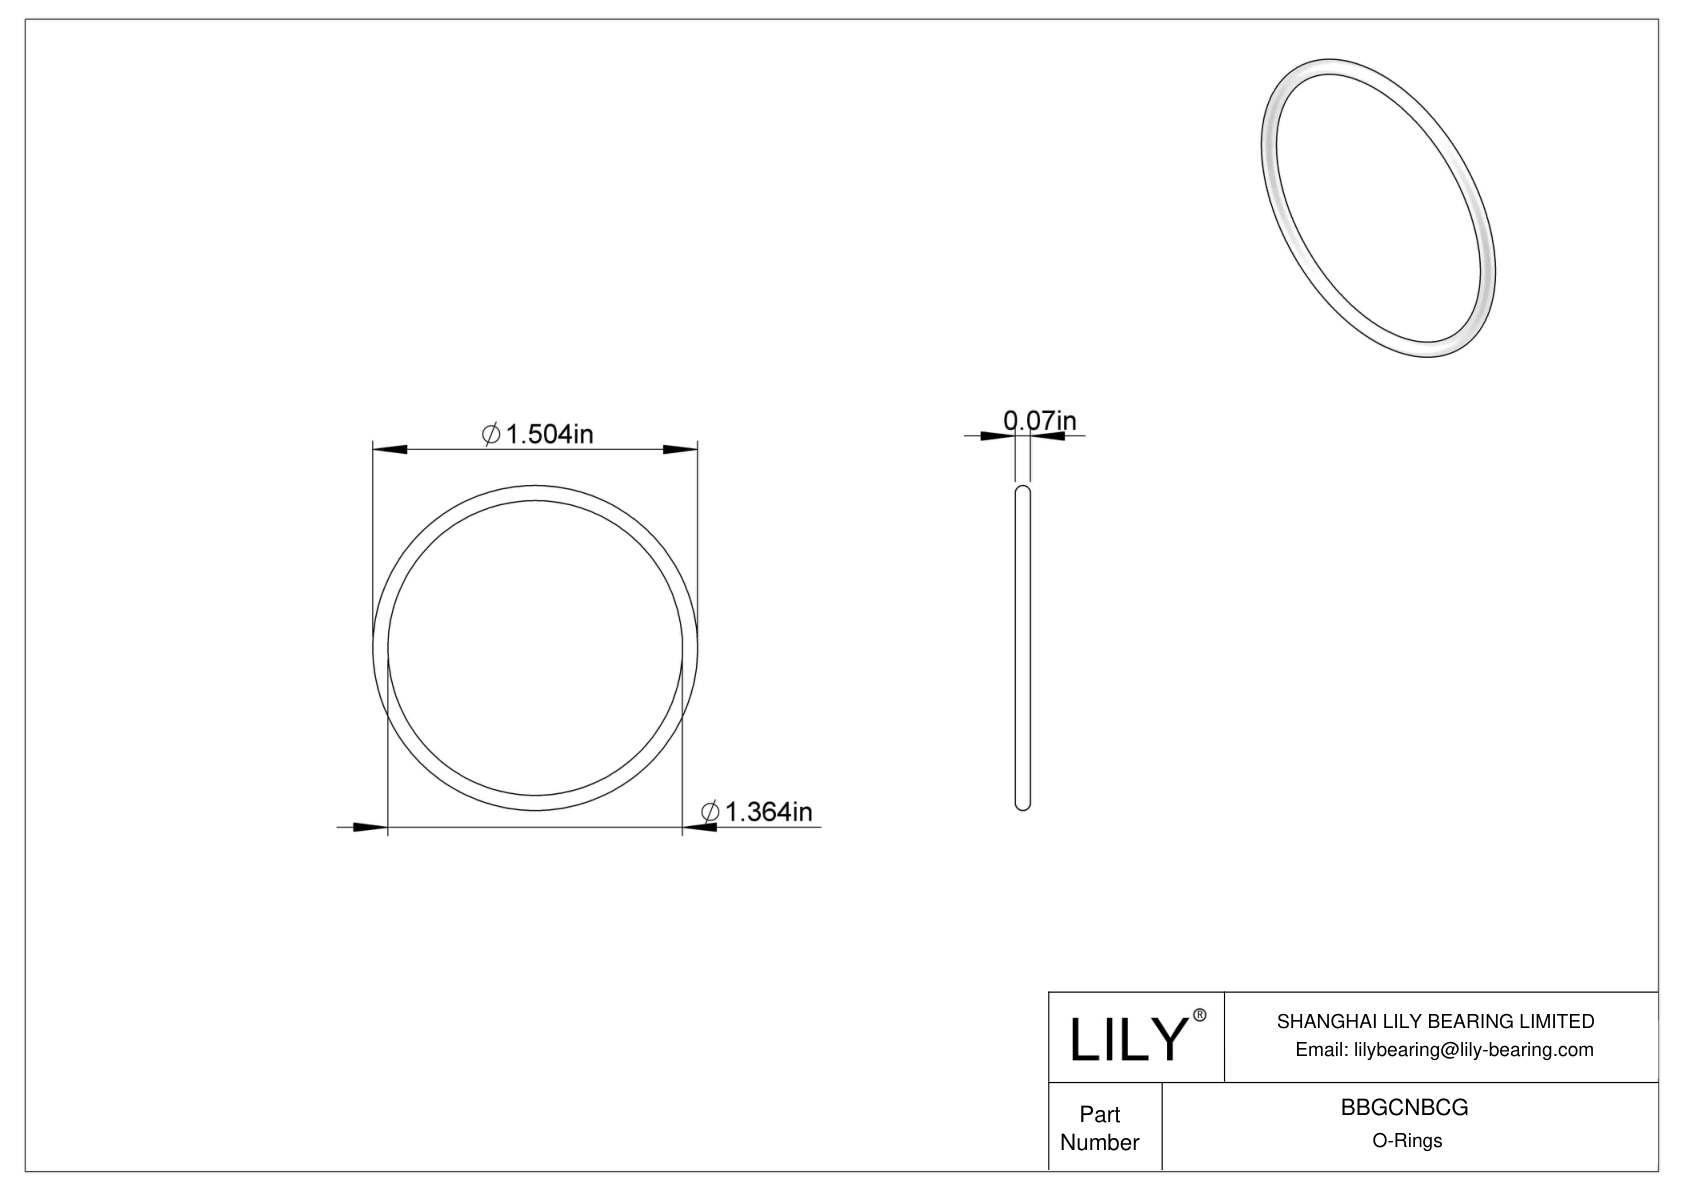 BBGCNBCG High Temperature O-Rings Round cad drawing